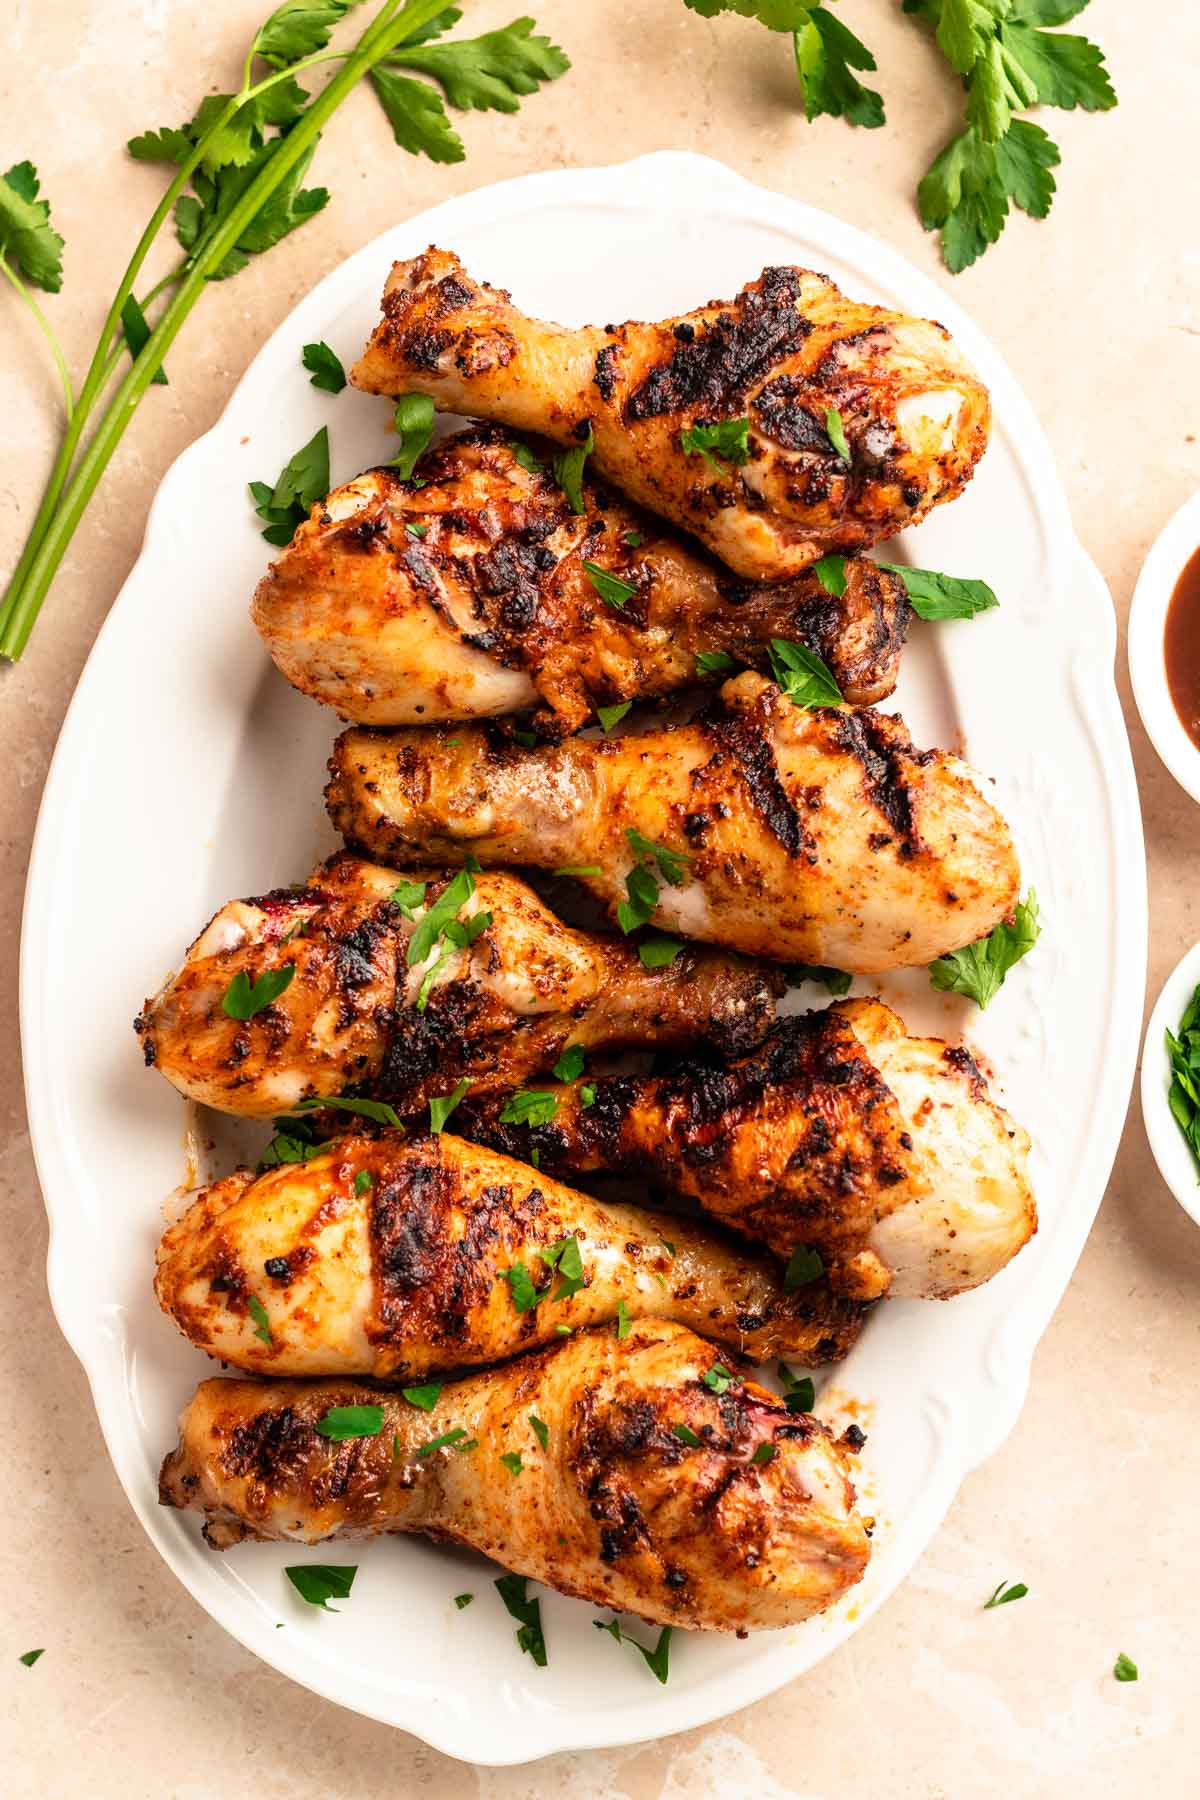 Top of a large plate with grilled chicken drumsticks.